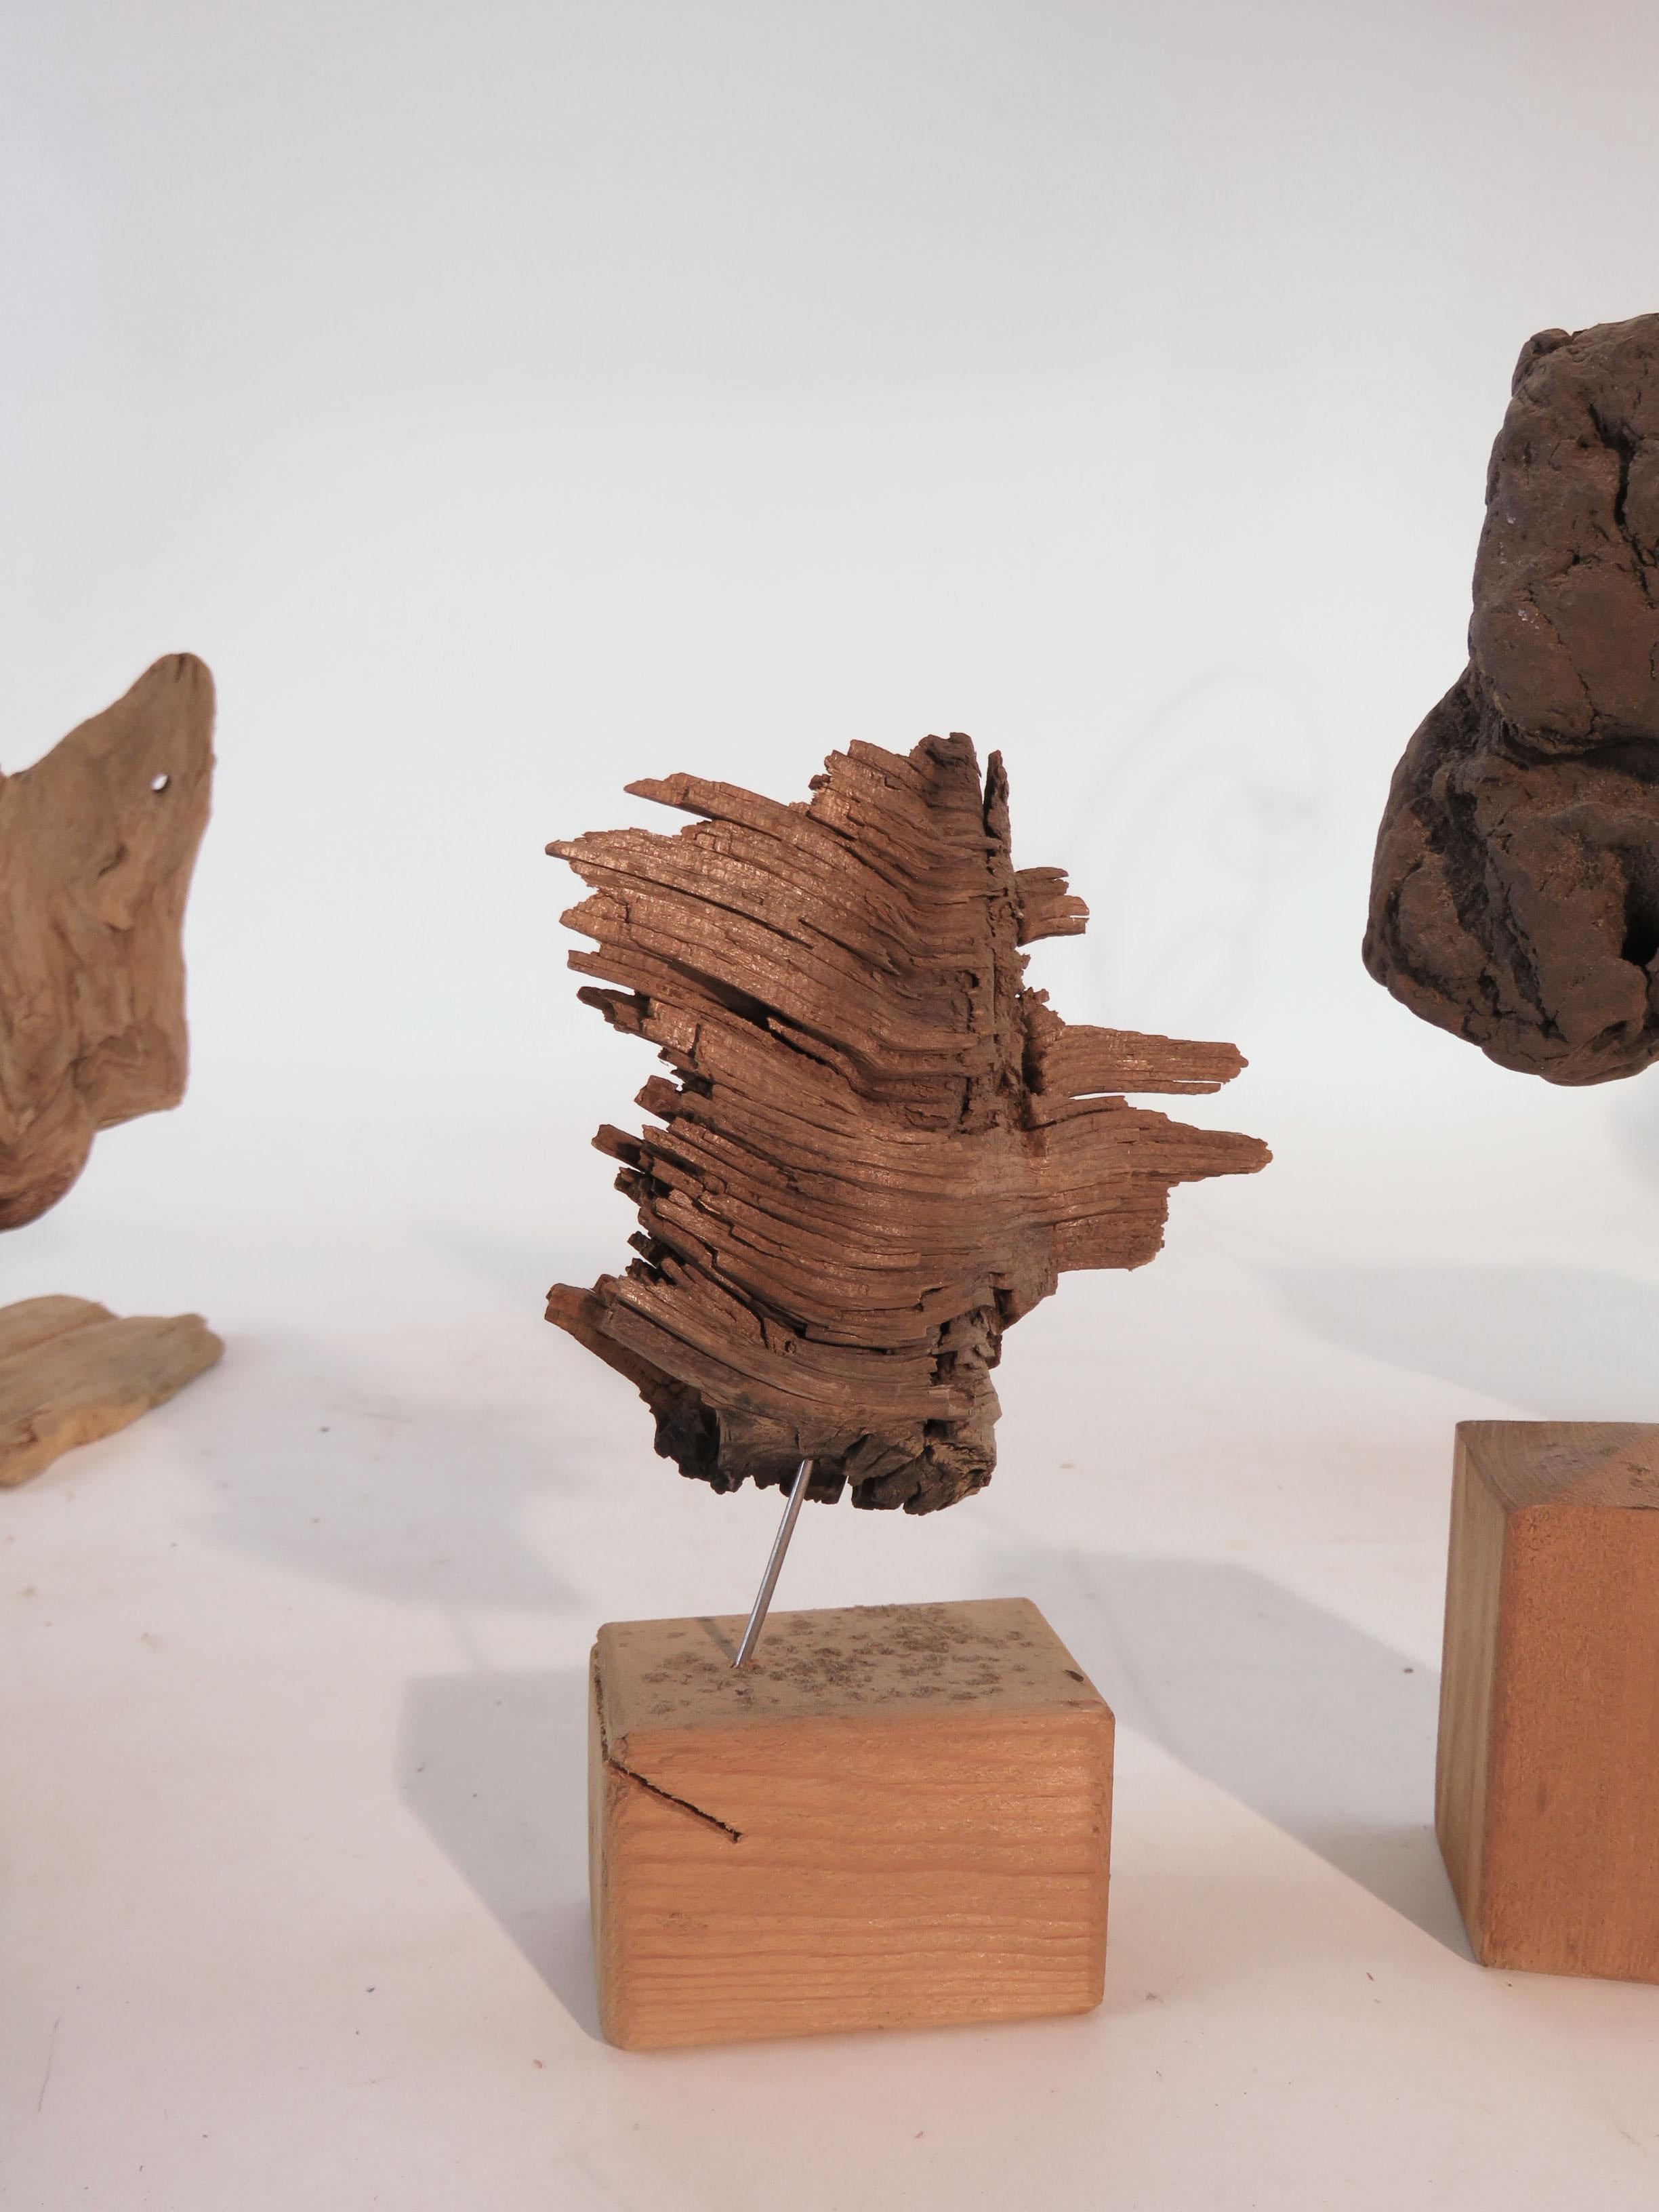 20th Century Collection of Abstract Driftwood Sculptures, Gloucester, MA, circa 1960s-1970s